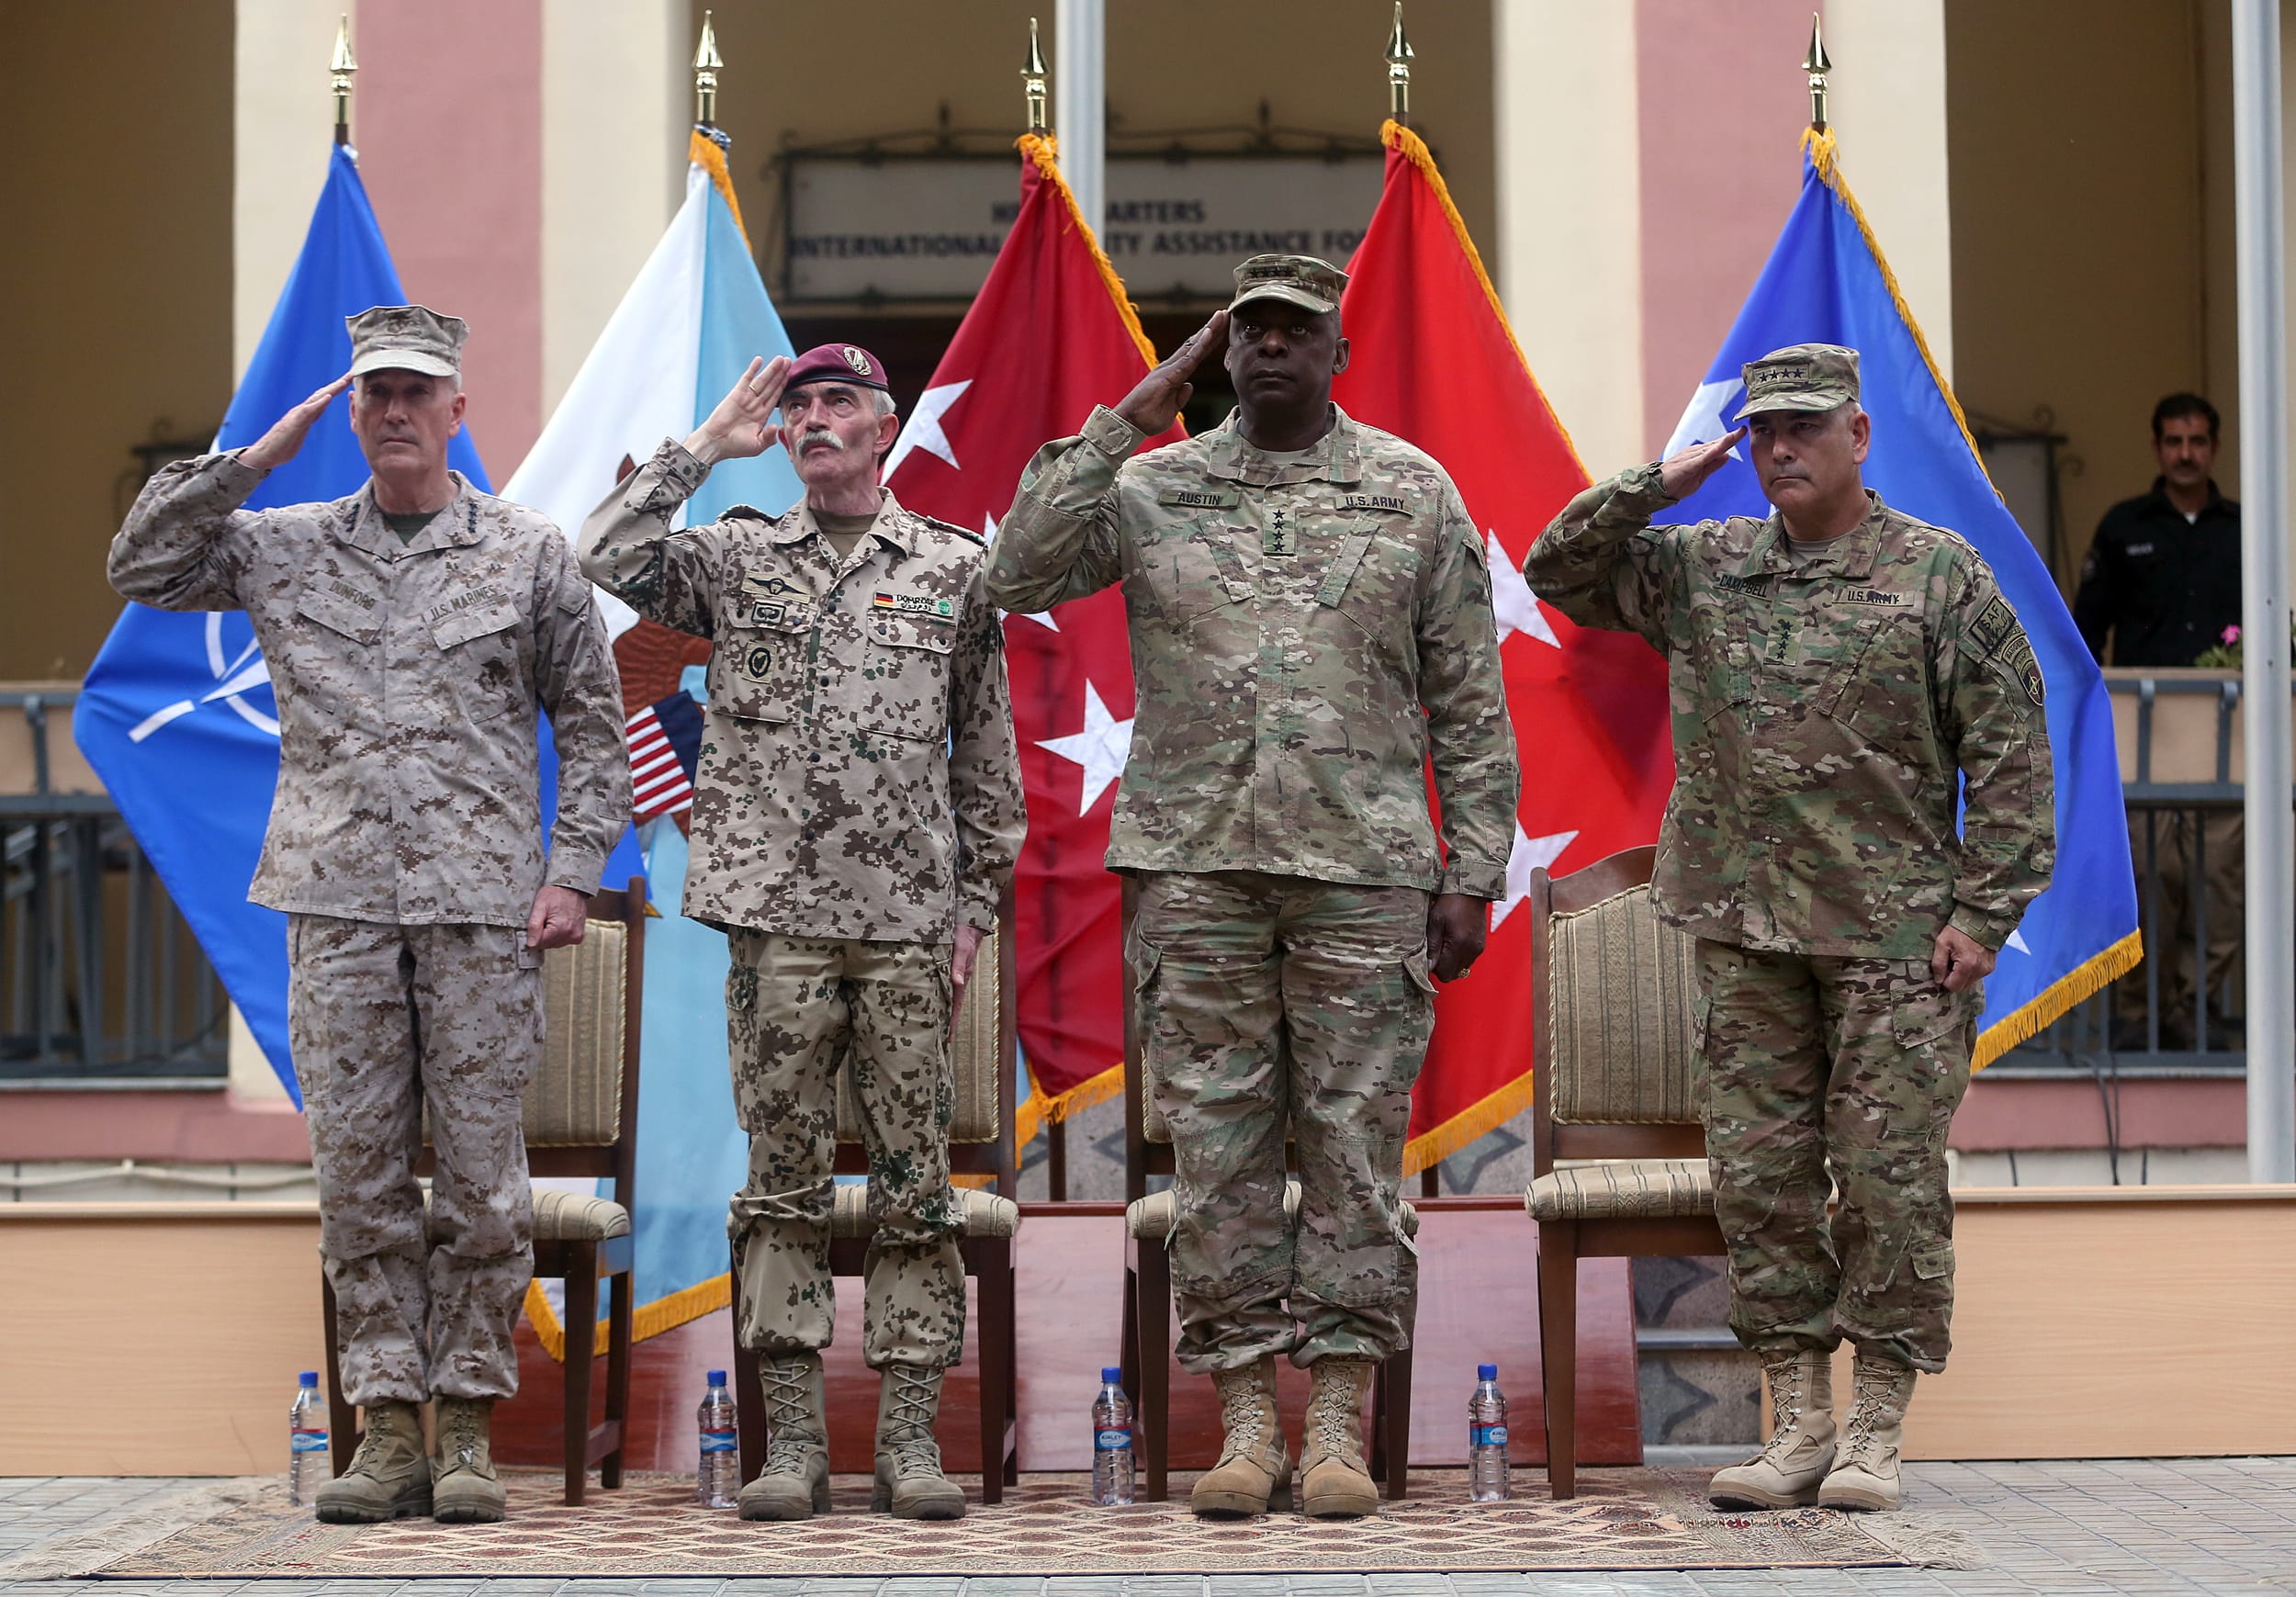 Outgoing commander of ISAF, U.S. Gen. Joseph Dunford, left, and incoming U.S. Army Commander for International Security Assistance Forces, Gen. John F. Campbell, right, salute during a change of command ceremony at the ISAF Headquarters in Kabul, Afghanistan, on Tuesday. ISAF is a NATO-led security mission in Afghanistan that was established by the United Nations Security Council in 2001.